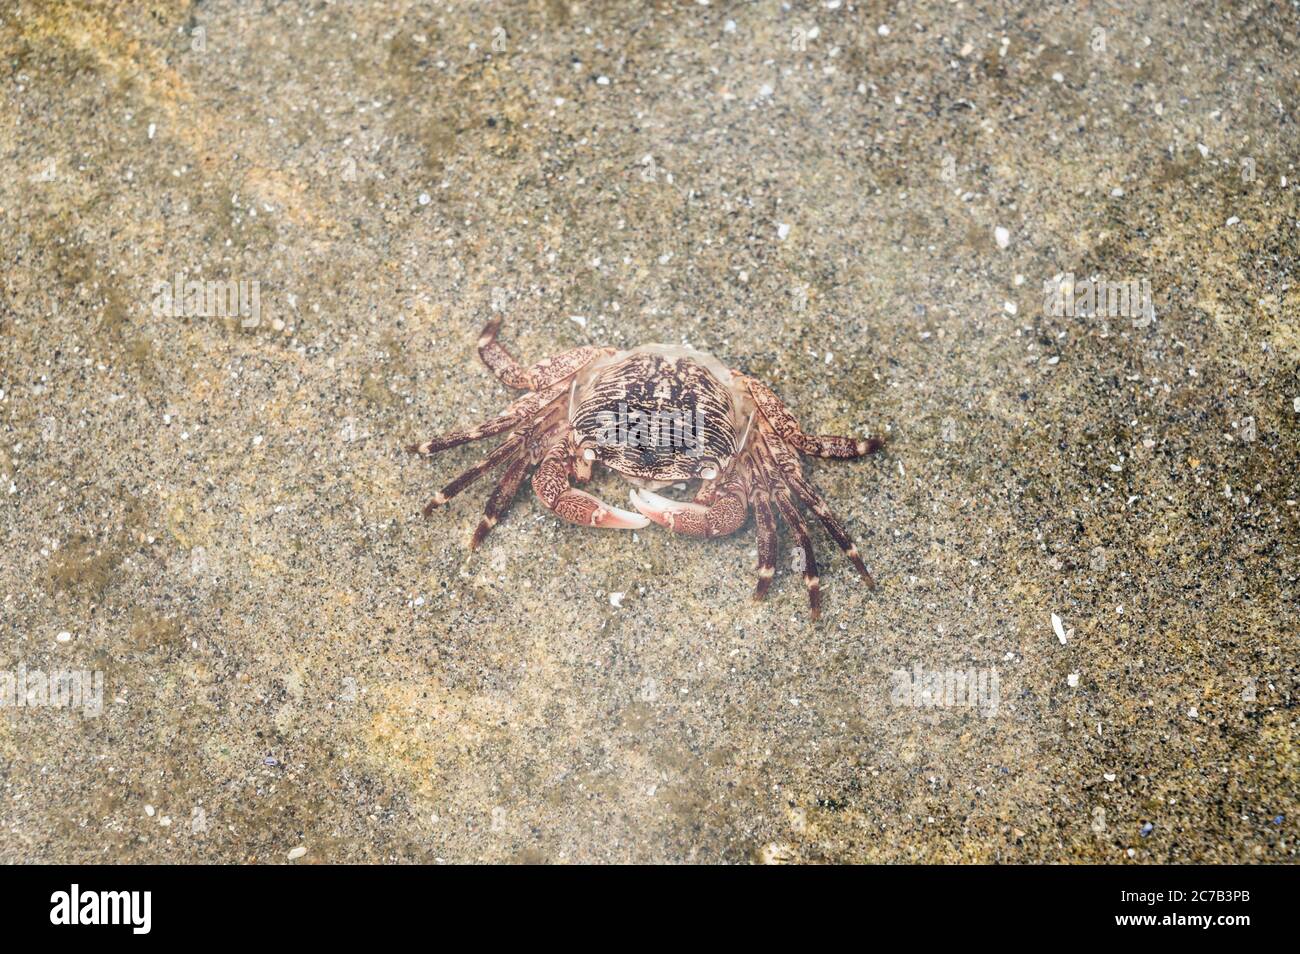 Pacific Ocean crab in a shallow waters of the shore Stock Photo